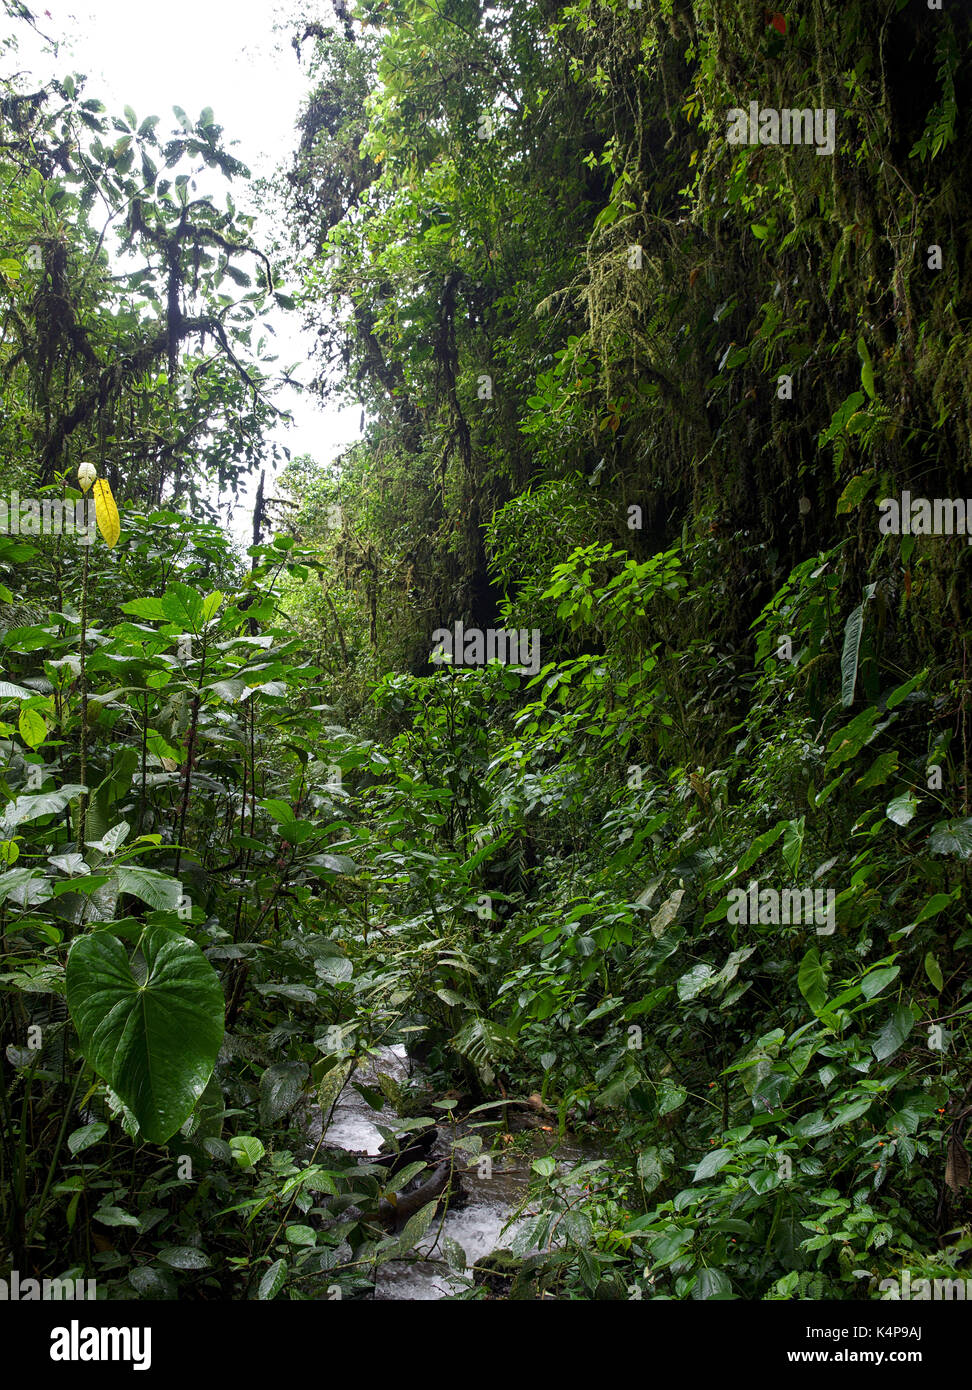 PAHUMA RESERVE, ECUADOR - 2017: Pahuma orchid reserve is located about an hour northwest of Quito. Stock Photo